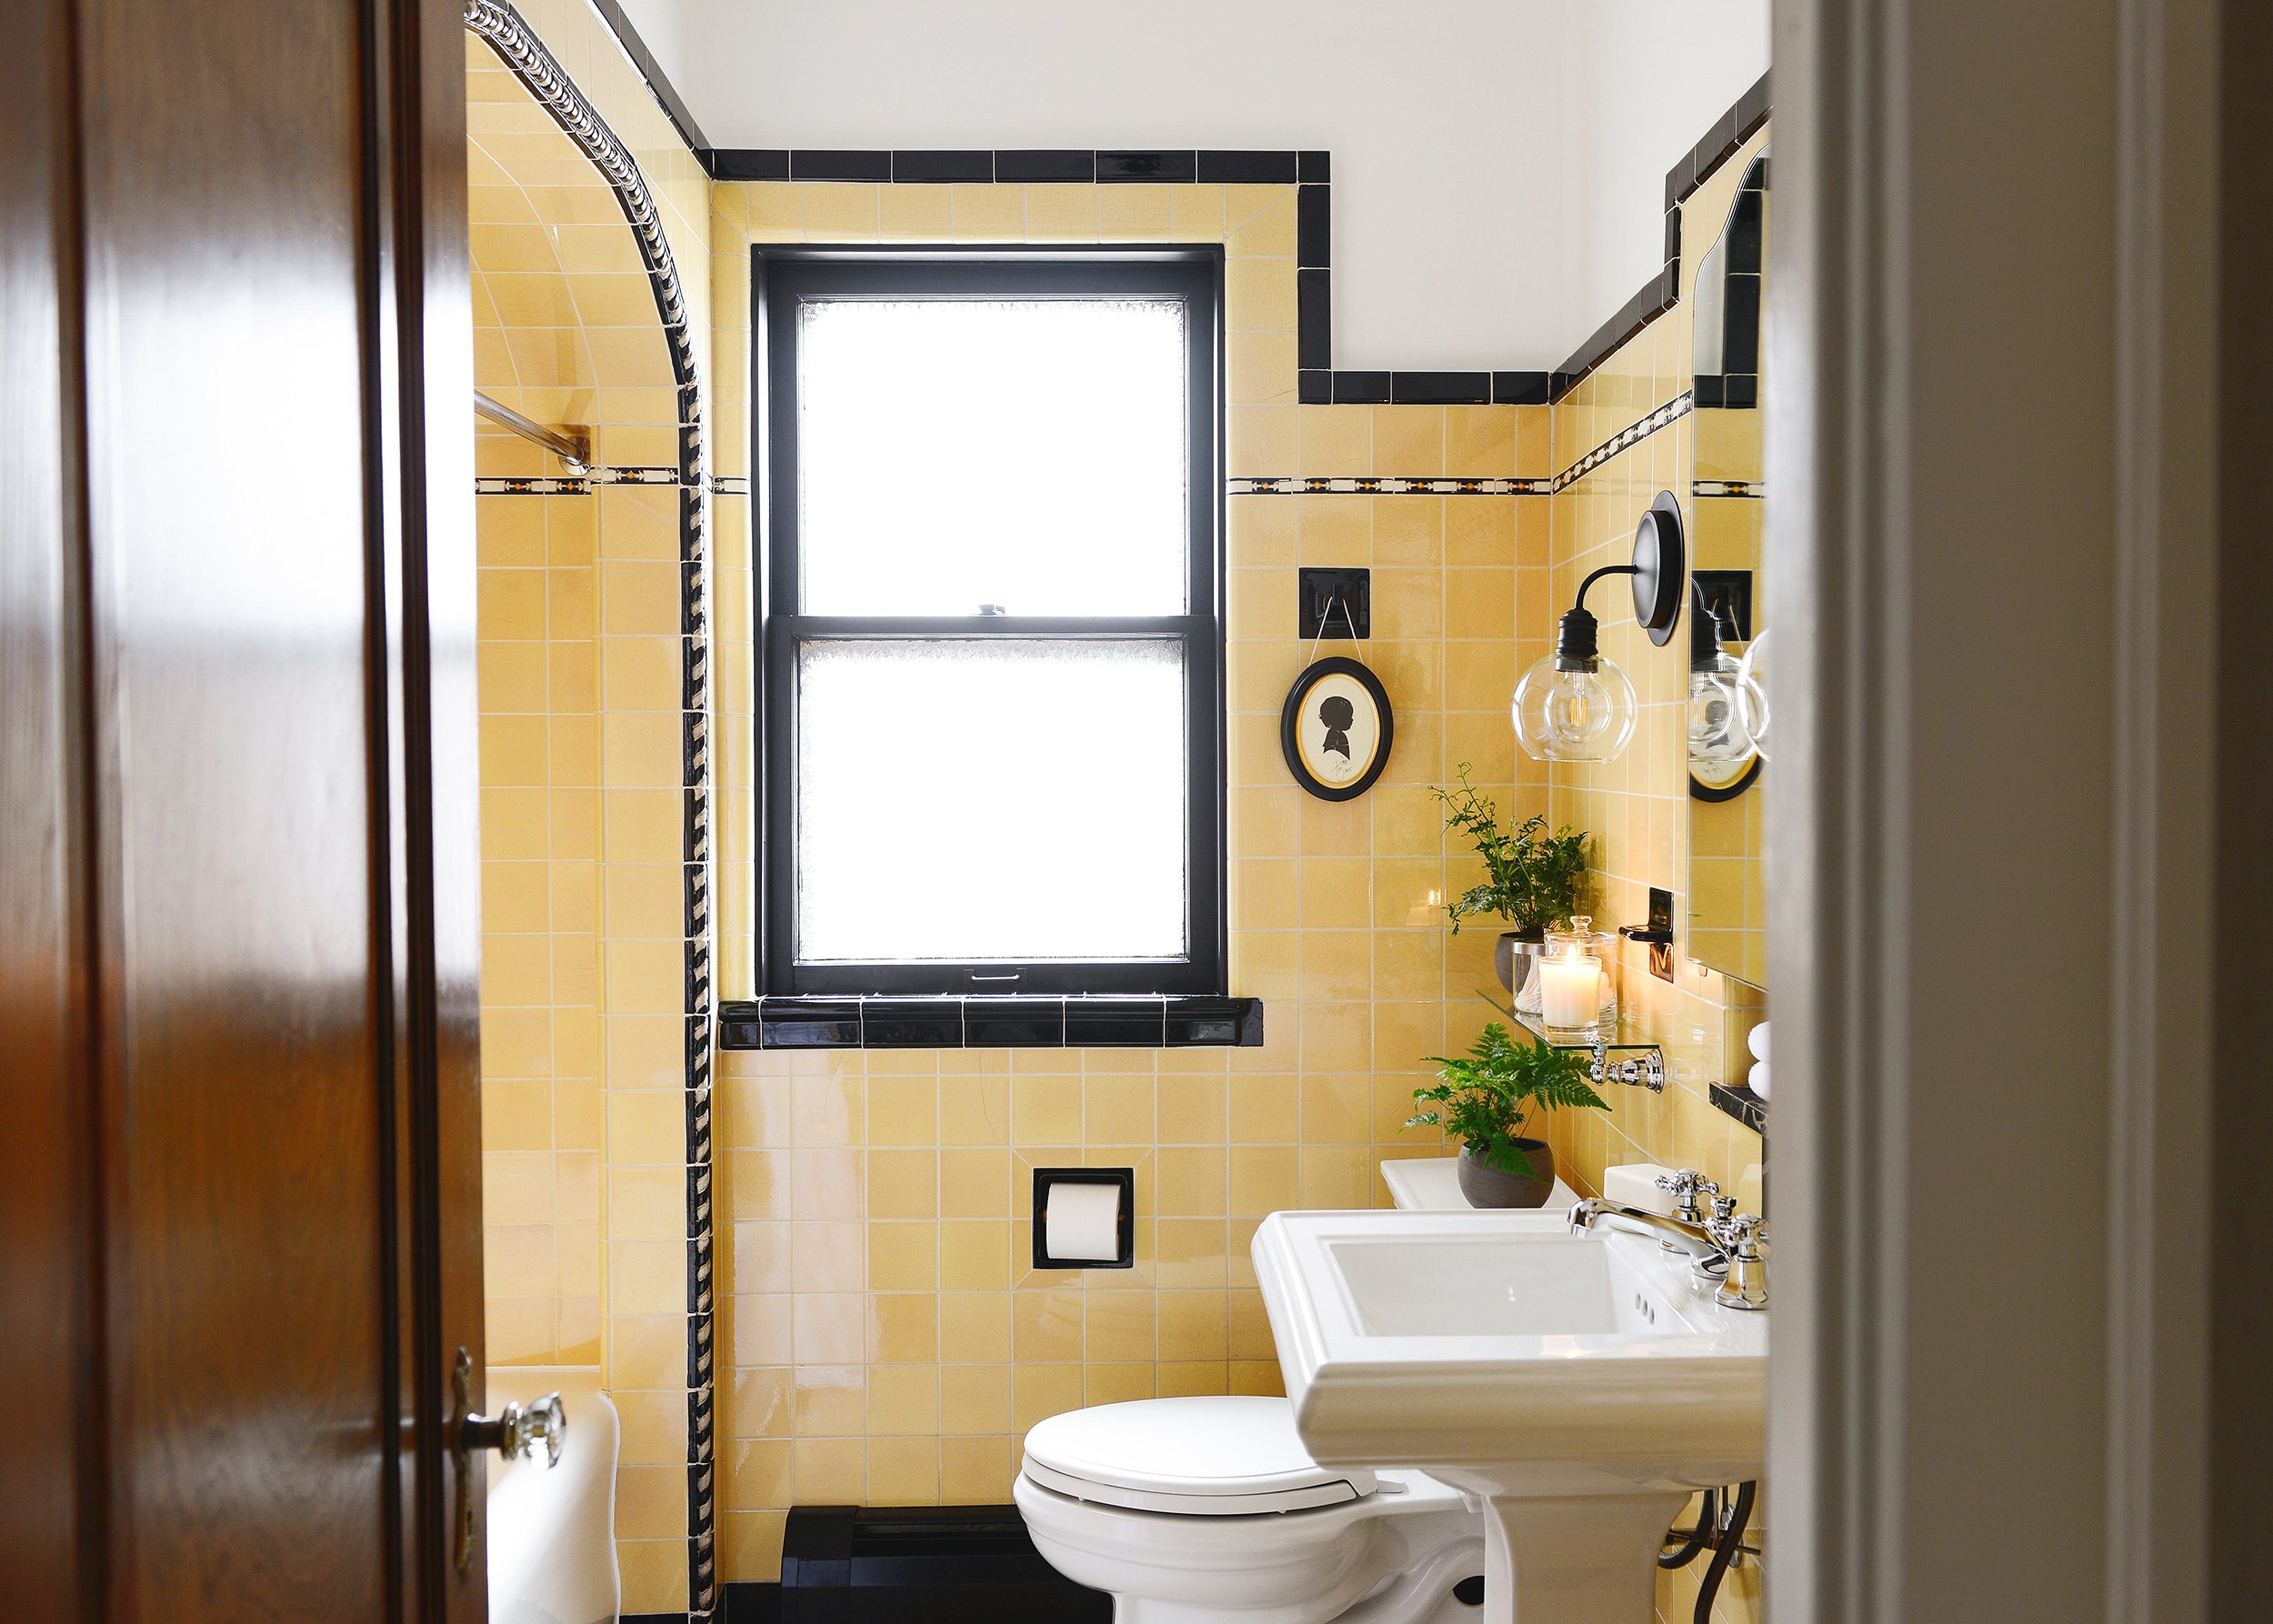 Silhouette of a child in a bathroom with vintage yellow tile | round-up of 19 works of art that would look good in a bathroom, via Yellow Brick Home